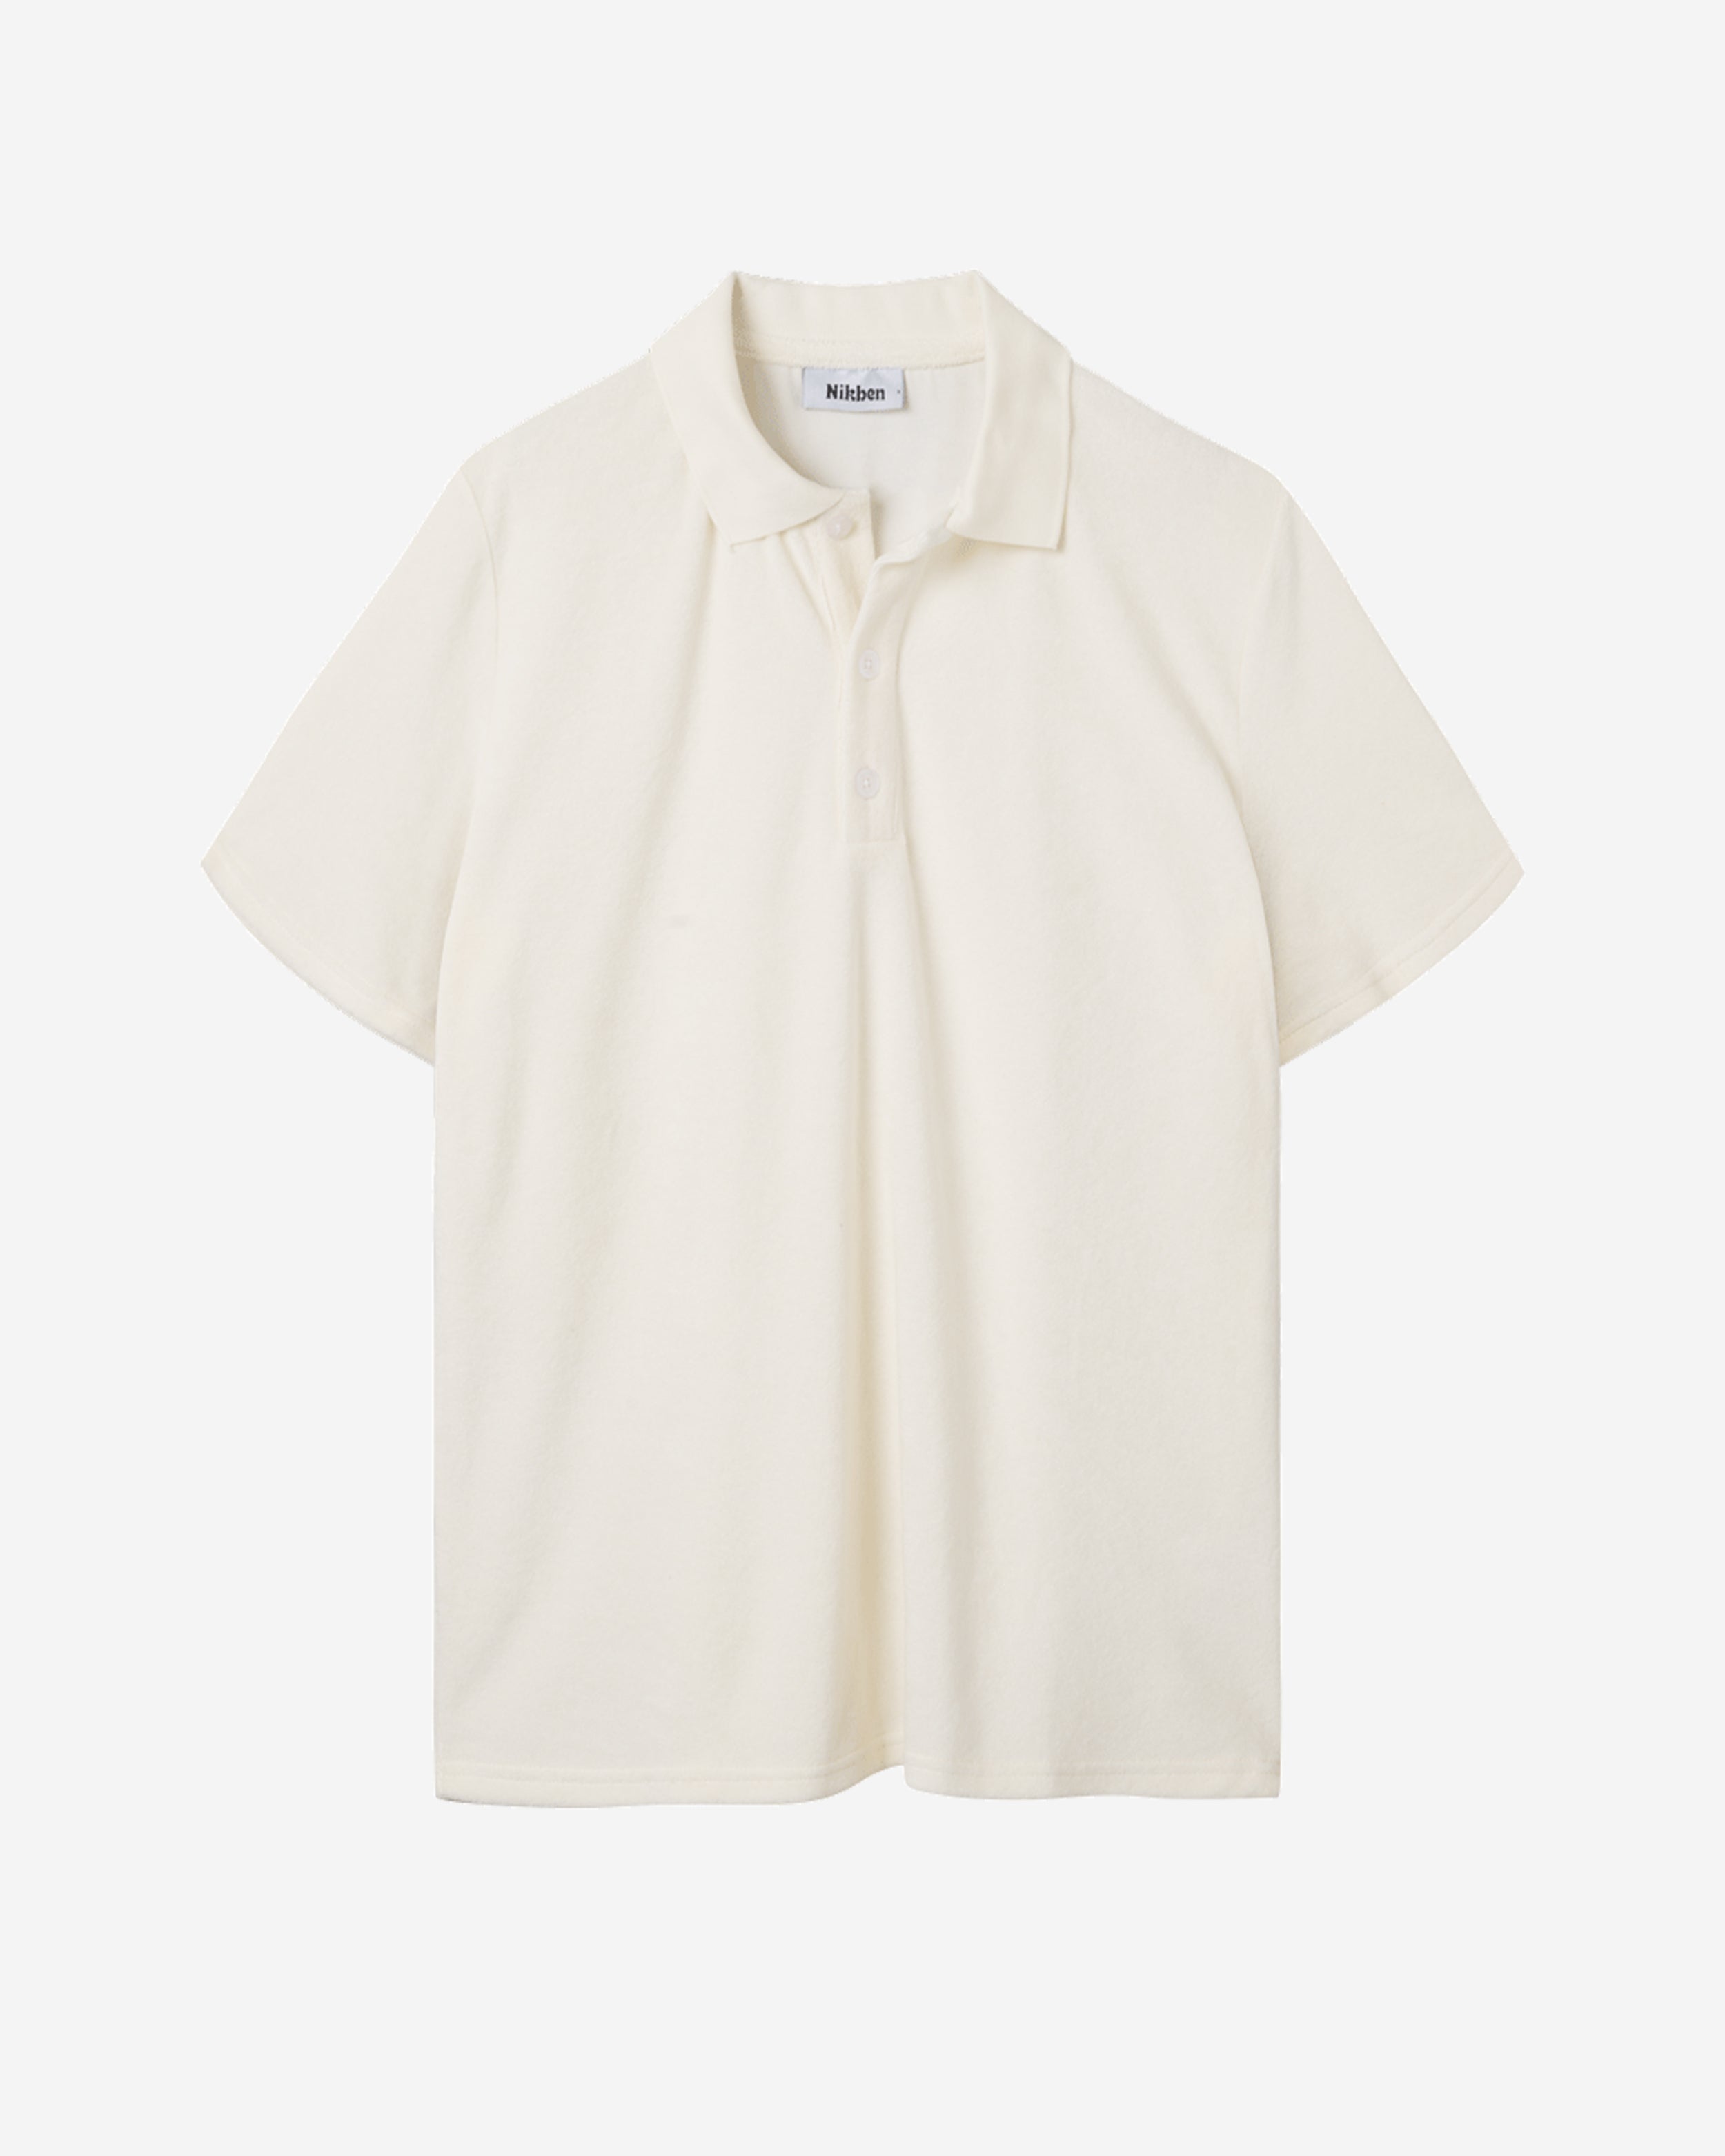 White short sleeve piké shirt in terry toweling fabric.